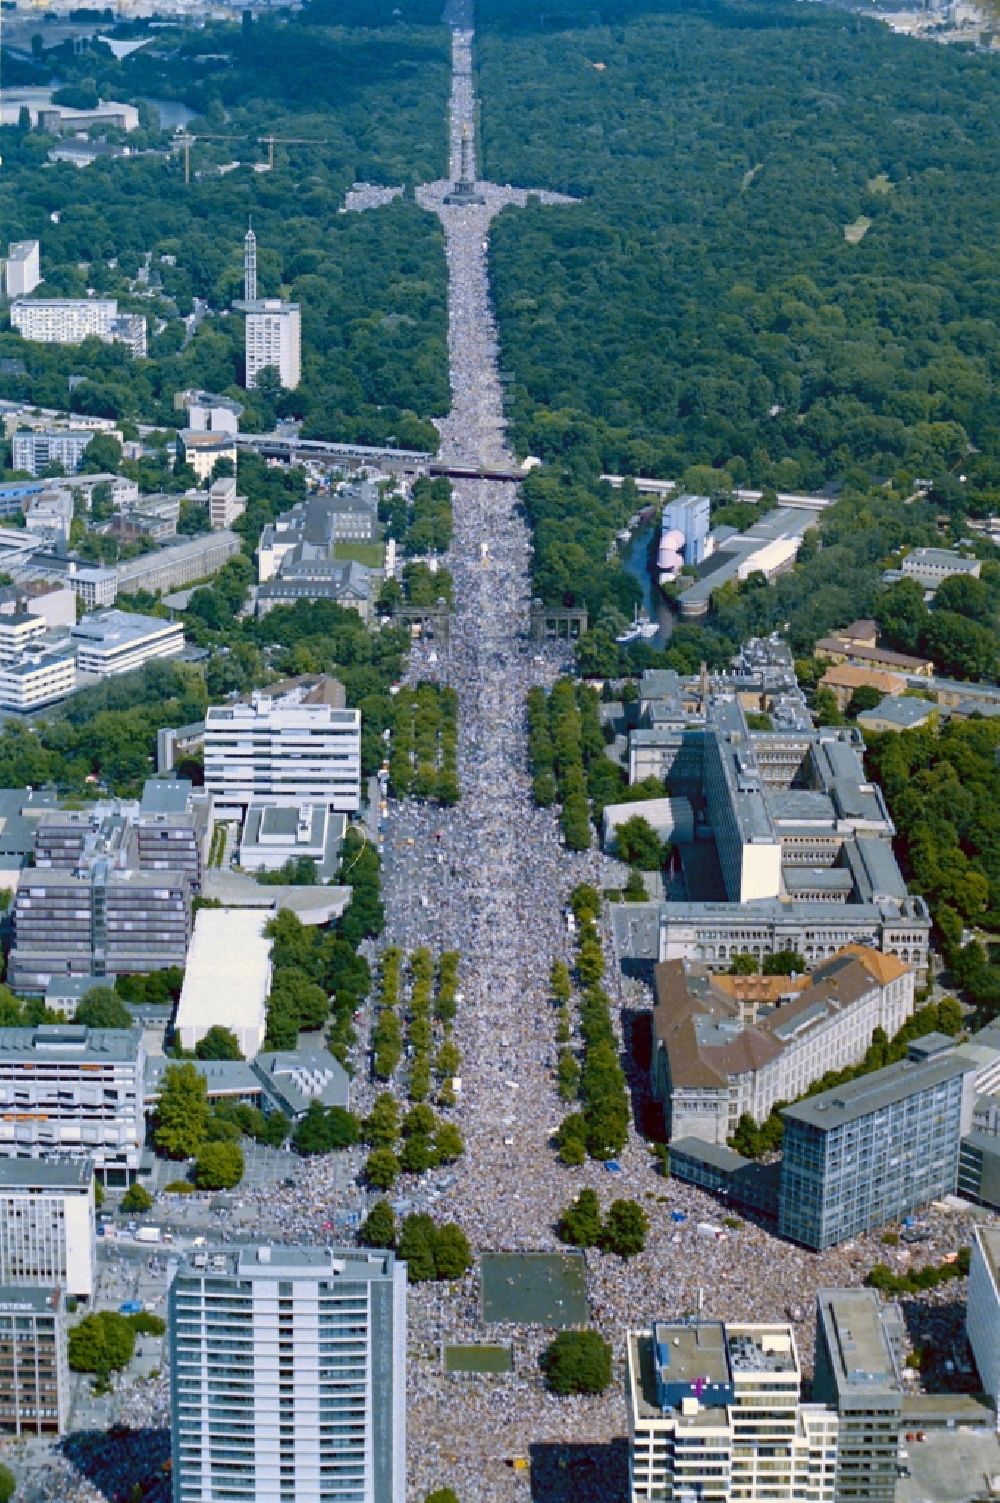 Berlin from above - Participants of the Loveparade at Ernst-Reuter-Platz - Strasse des 17. Juni music festival on the event concert site in the Charlottenburg district in Berlin, Germany